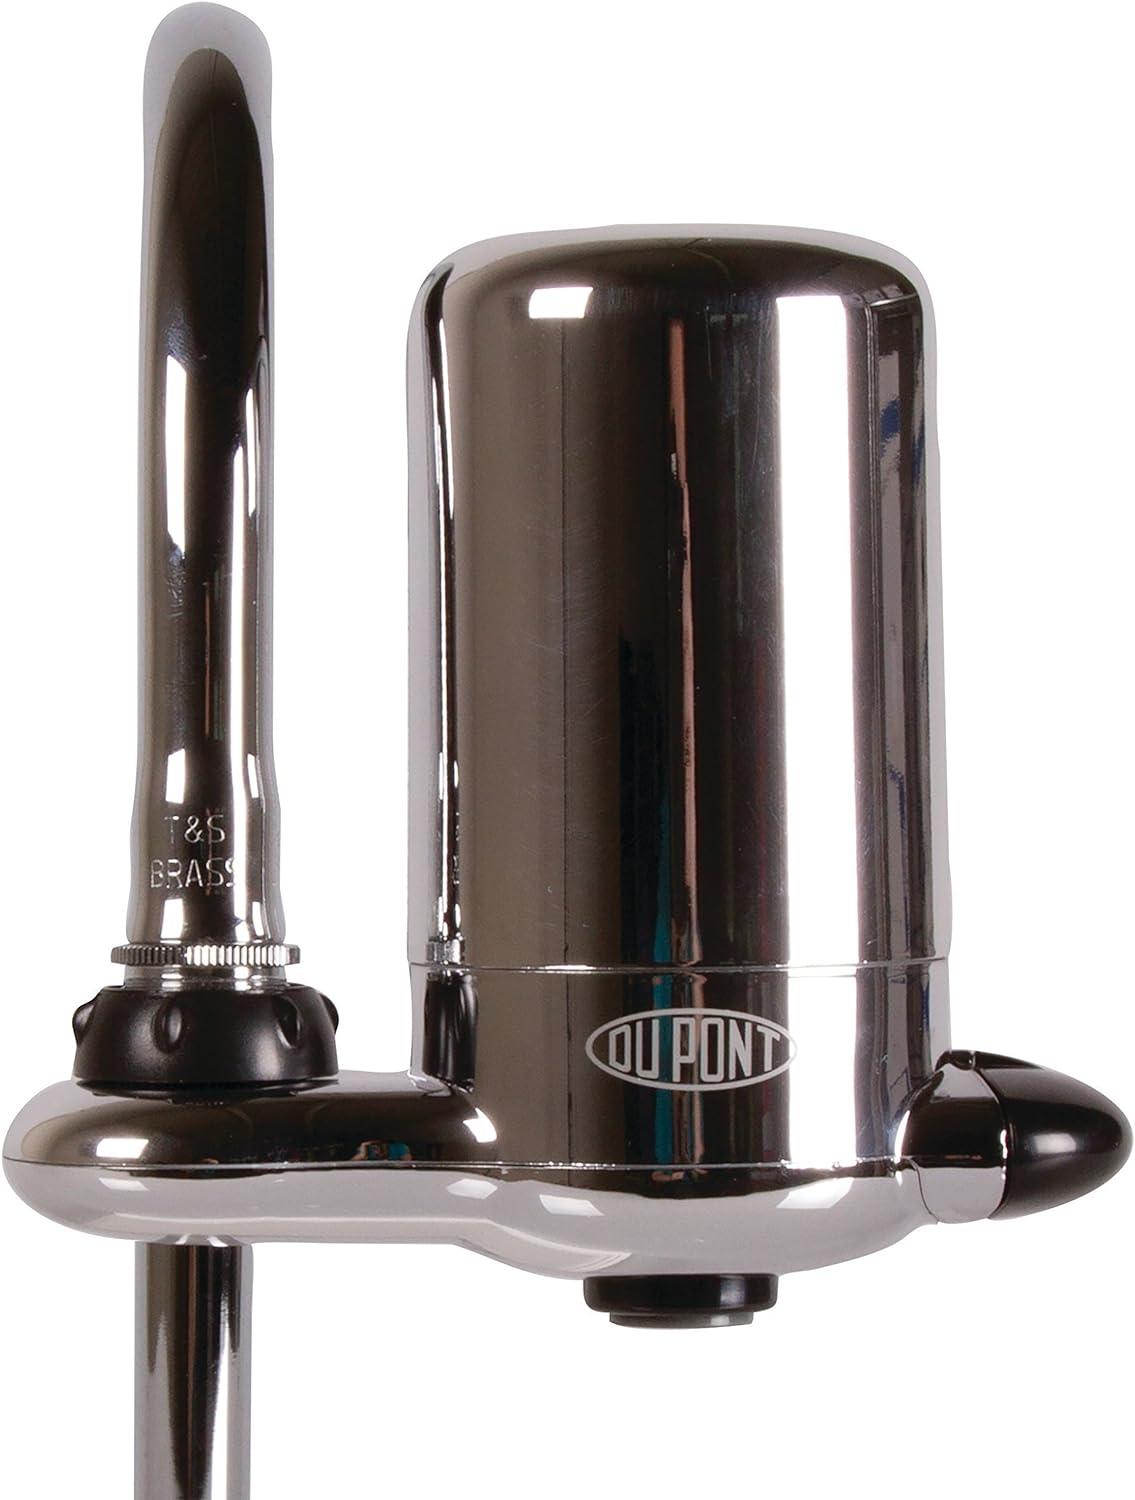 Dupont WFFM100XCH Premier Faucet Mount Drinking Water Filter, Chrome